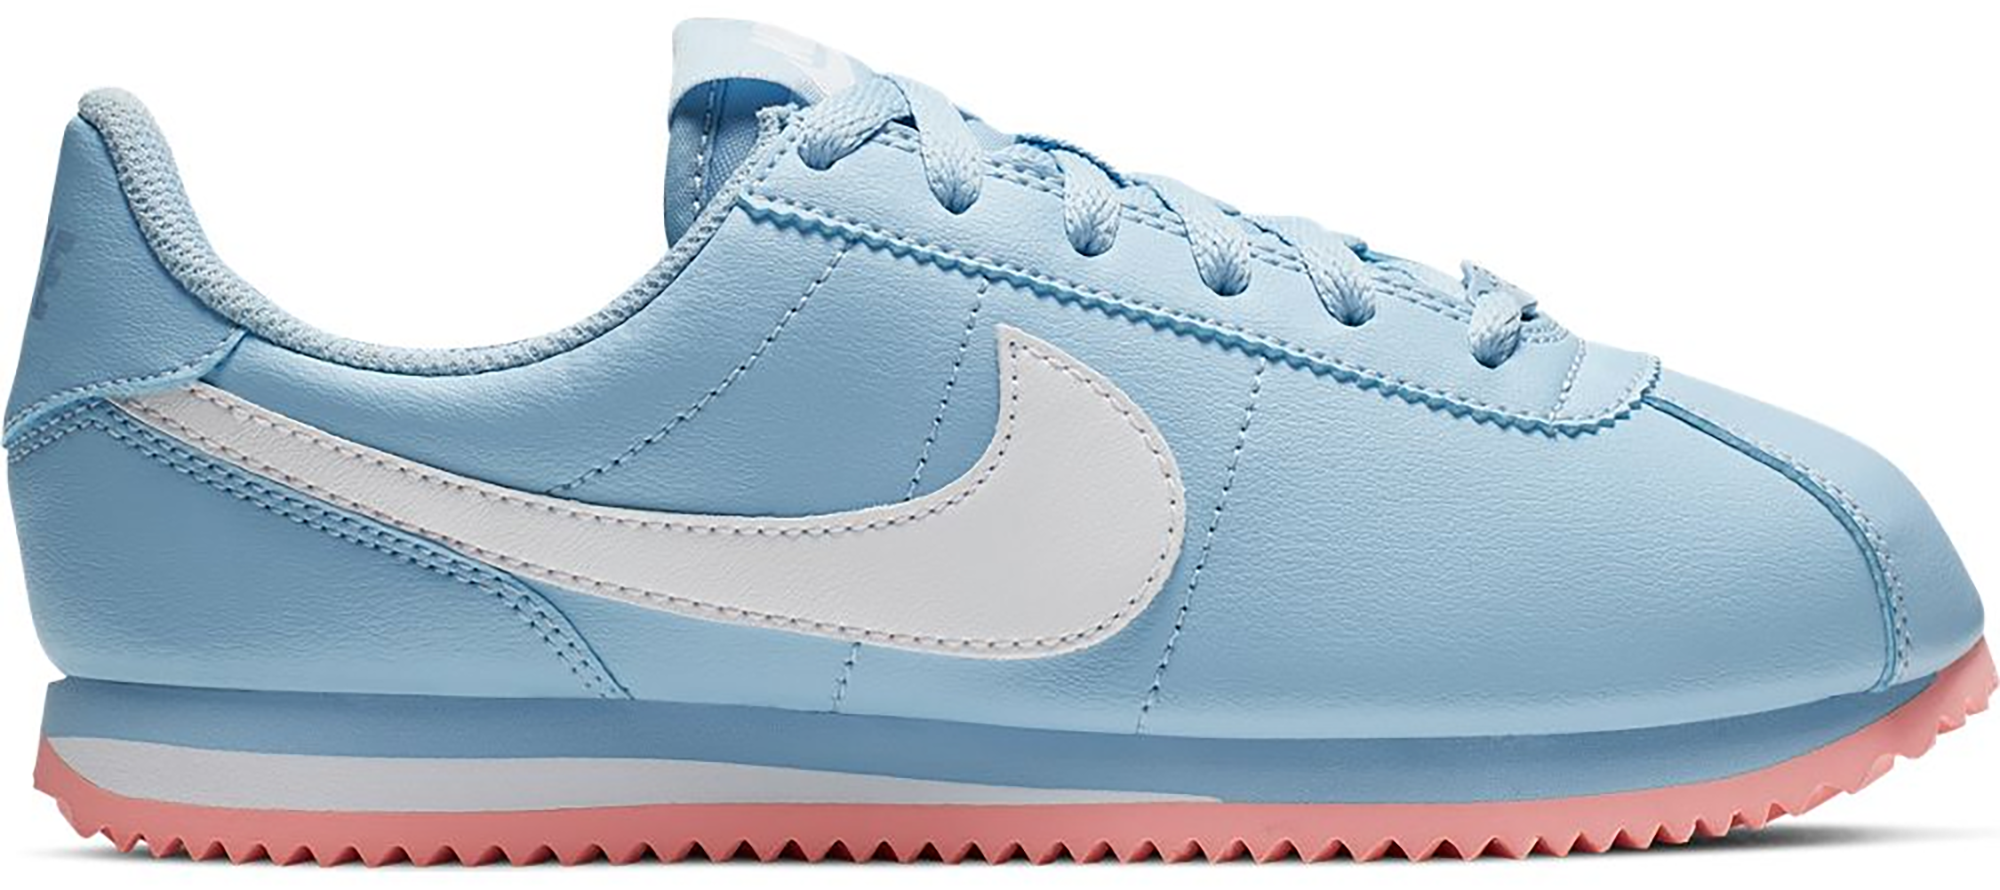 cortez nike blue and white